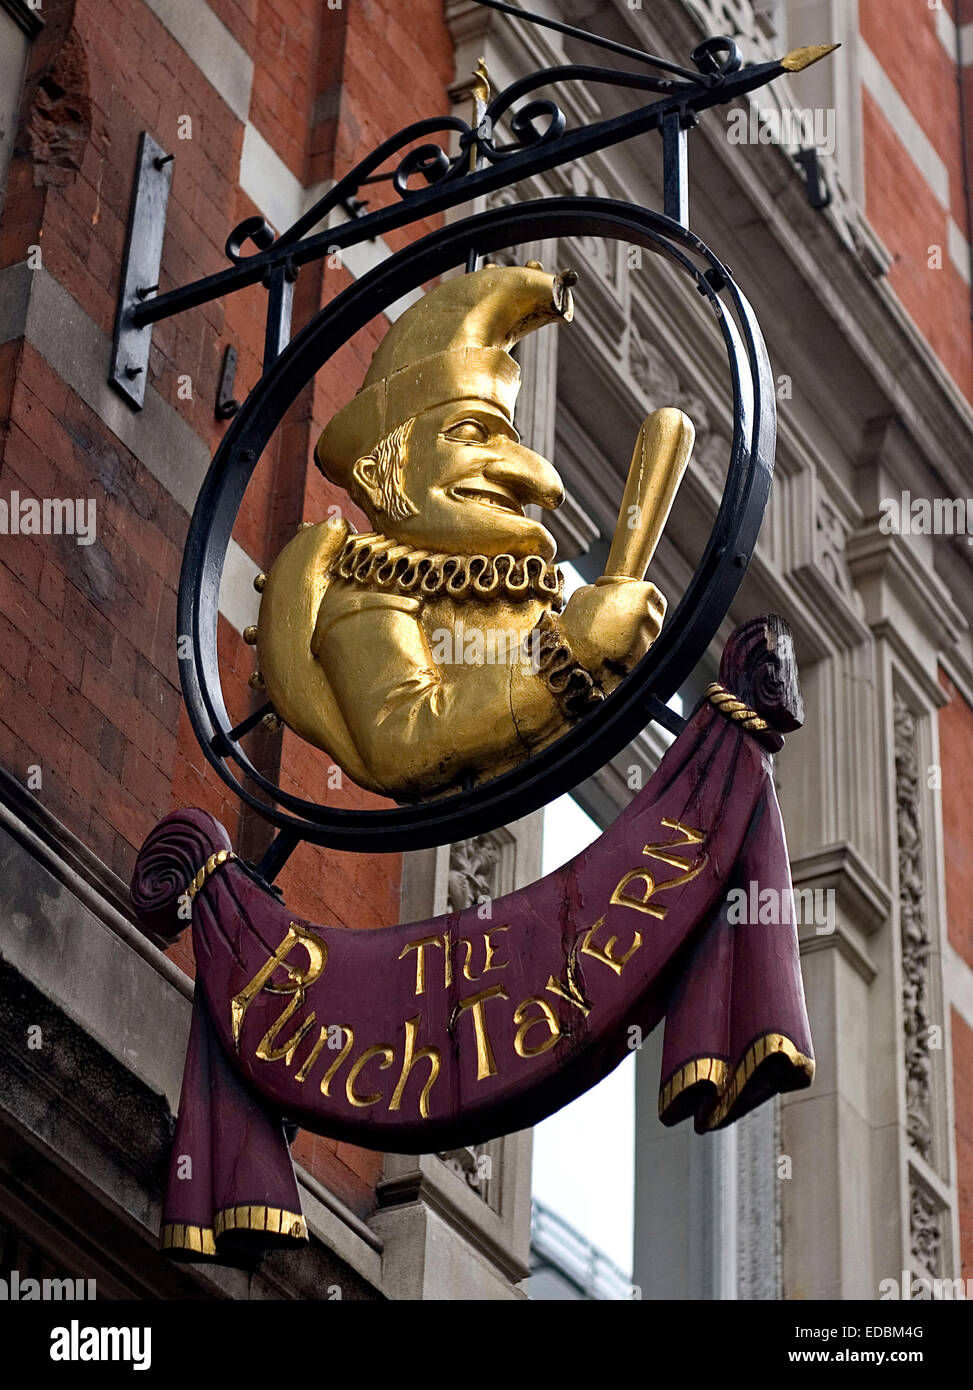 The Punch Tavern, Fleet Street, London, which is owened by the Punch Taverns Group. Stock Photo